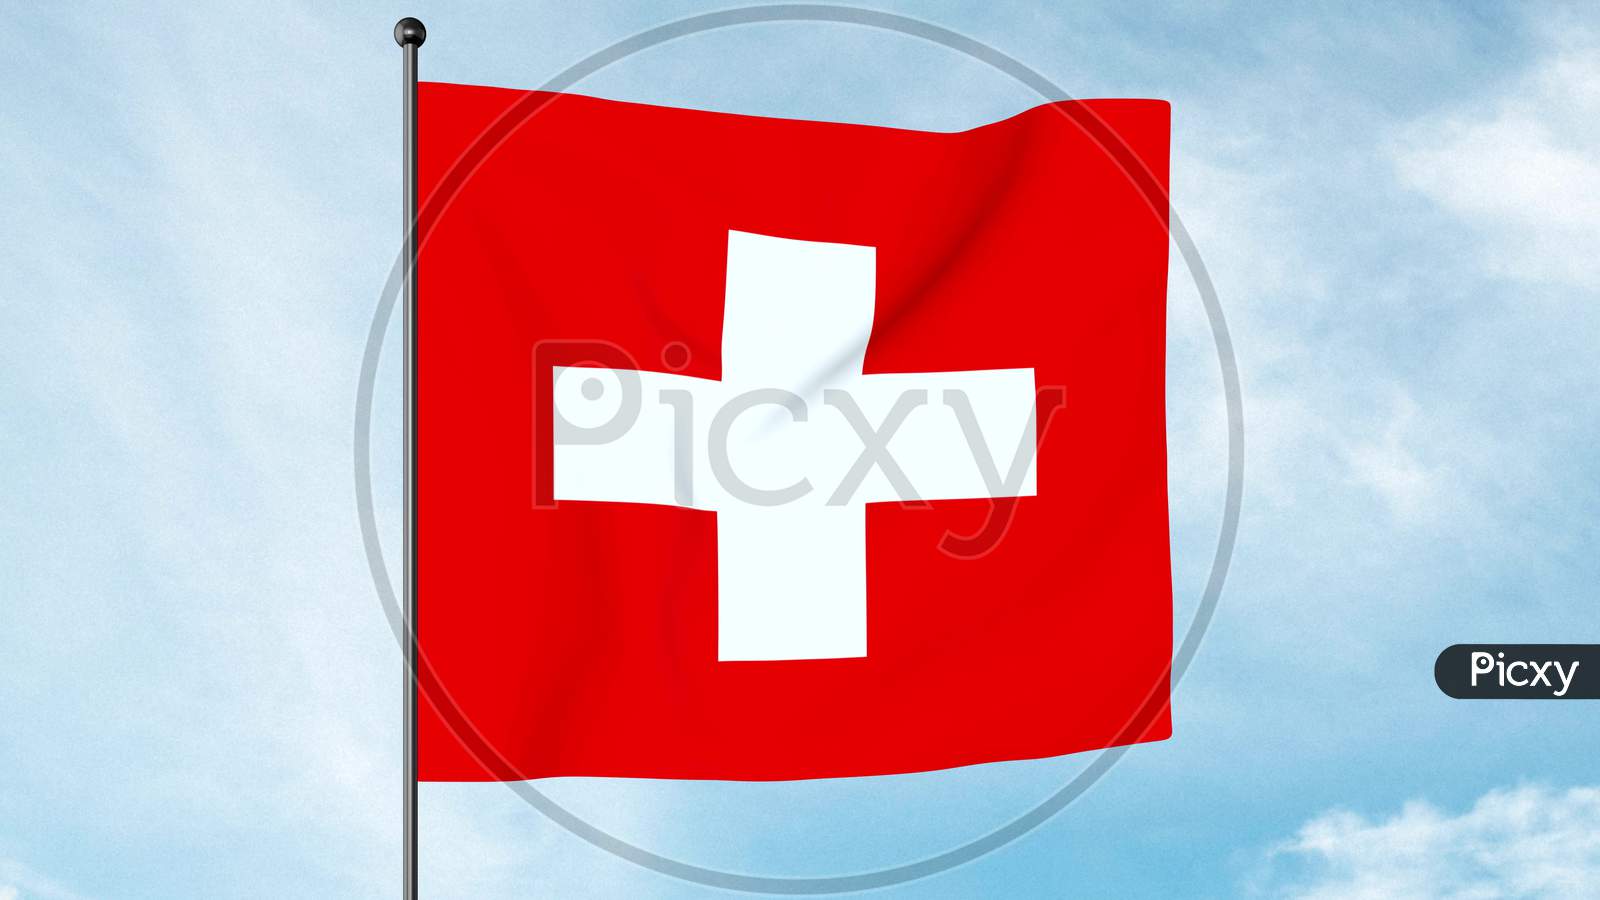 3D Illustration Of The Flag Of Switzerland Displays A White Cross In The Centre Of A Square Red Field. The White Cross Is Known As The Swiss Cross.